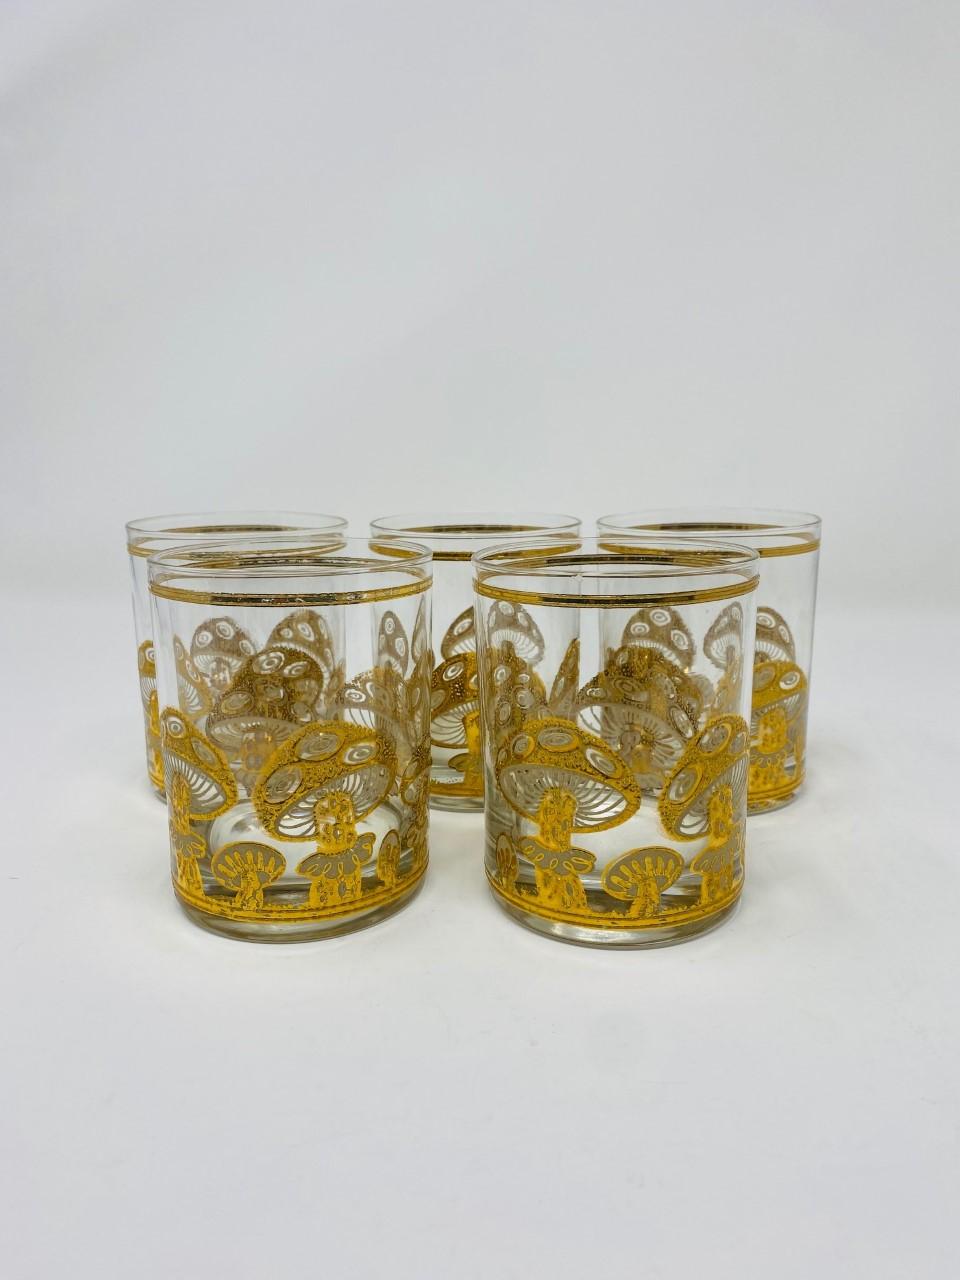 Beautiful set of glasses from the 1960’s in a magic mushroom pattern by Culver, Ltd. The patterns on the glass are made from 22k gold and are in impeccable condition. This beautiful set of 5 glasses is iconic, glamorous and luminous. The whimsical